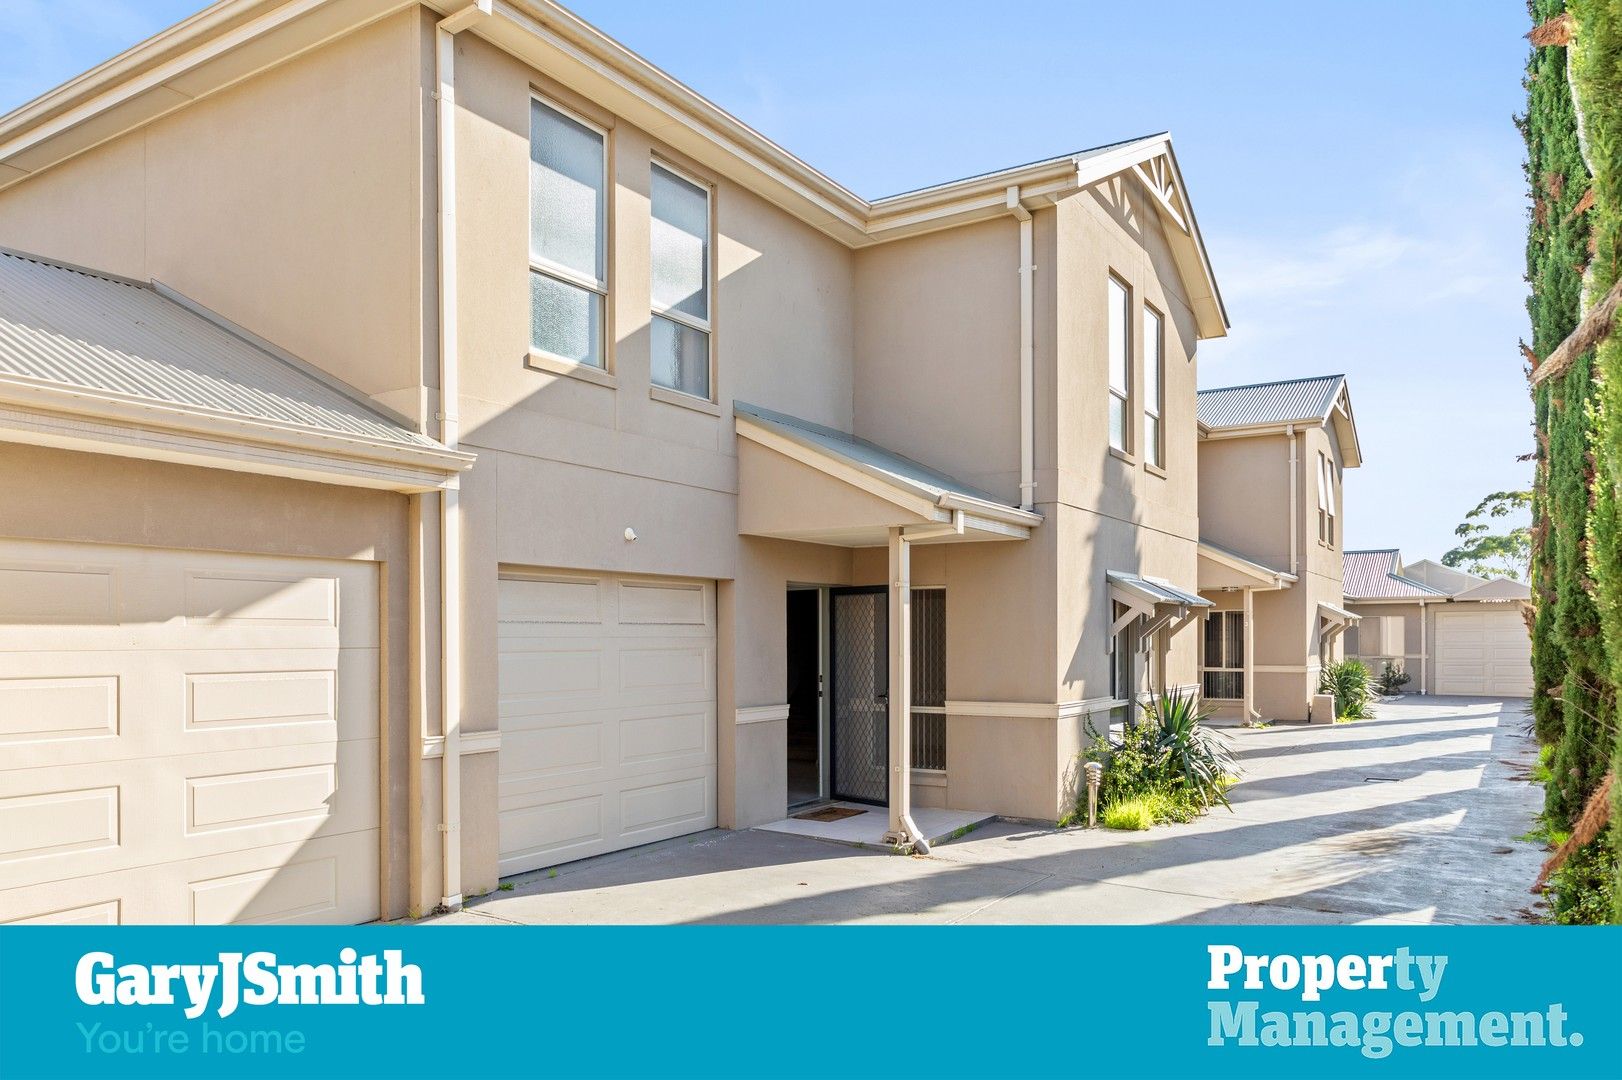 3 bedrooms Townhouse in 2/7 Griffiths Road PLYMPTON PARK SA, 5038